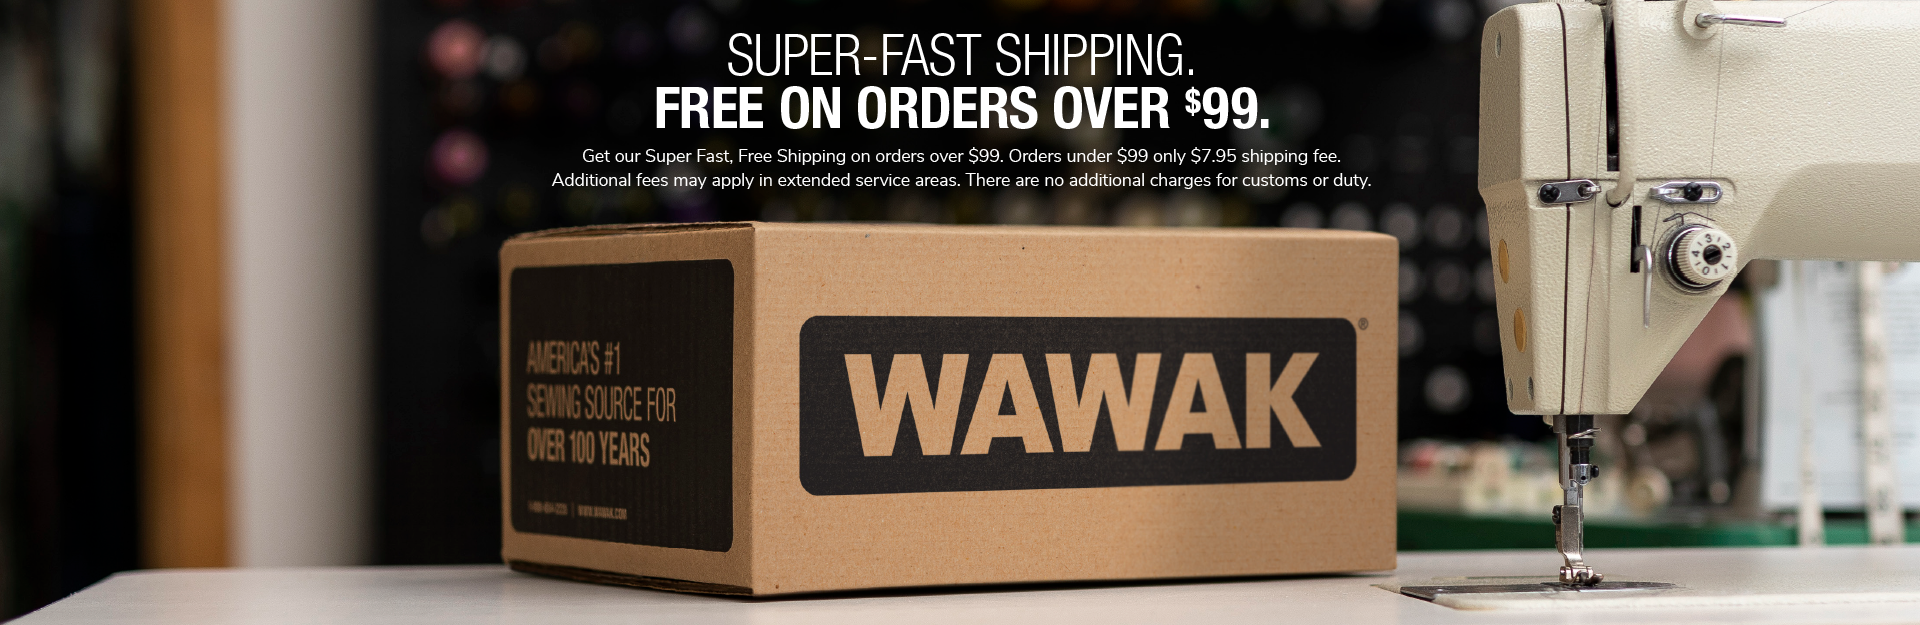 Super-Fast Shipping at WAWAK Sewing Supplies | Sewing Supplies Fast & Free on orders over $99